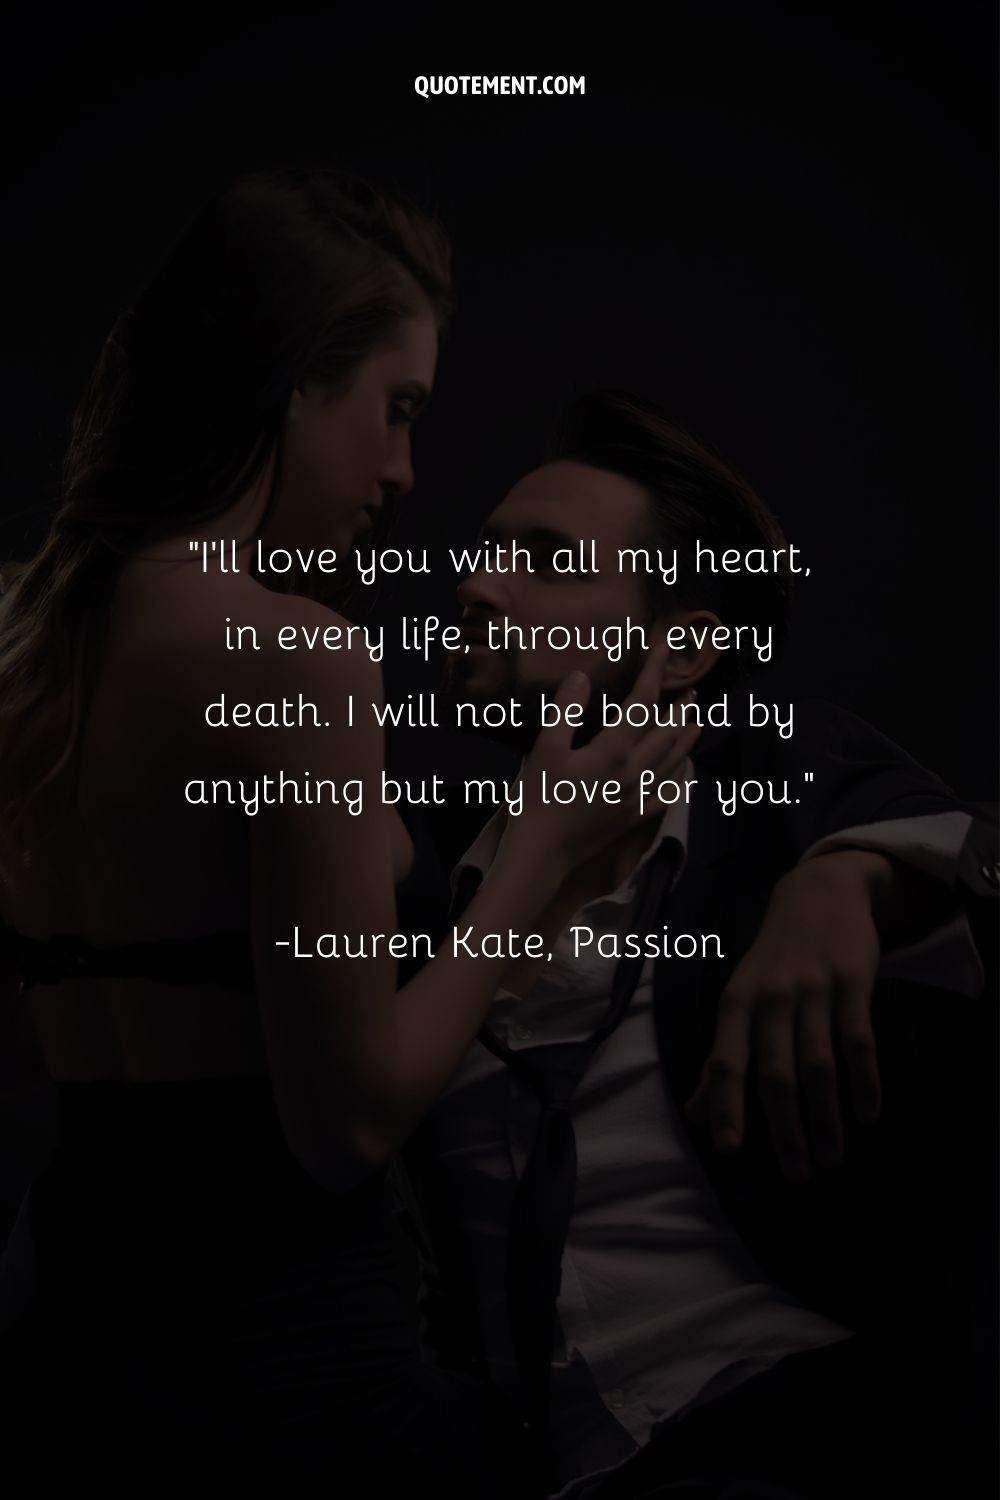 a couple embracing each other representing quote about finding your passion